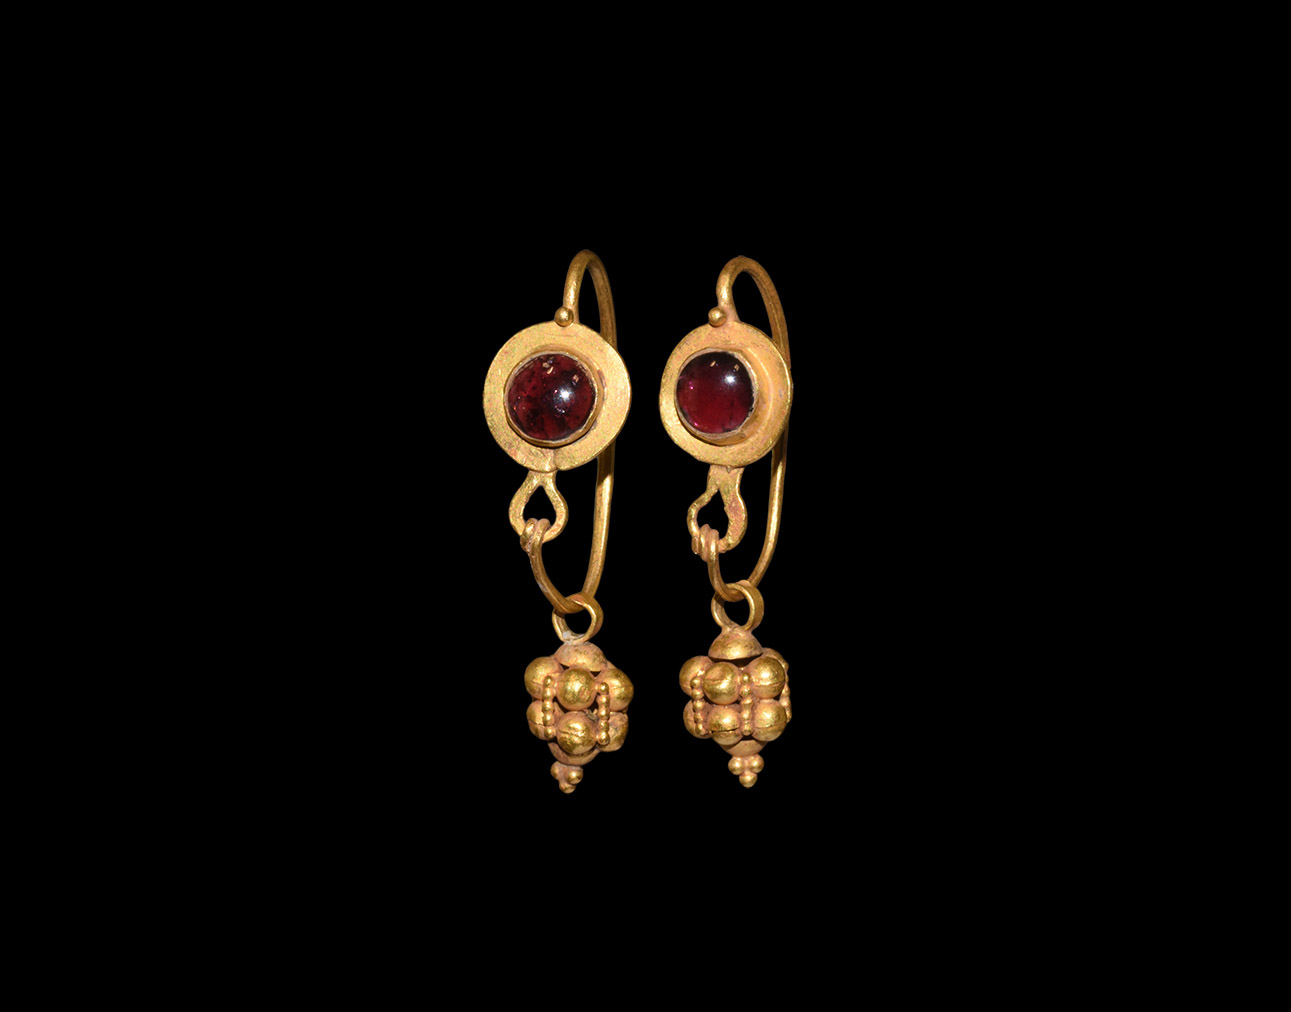 Roman Gold Earring Pair with Garnets